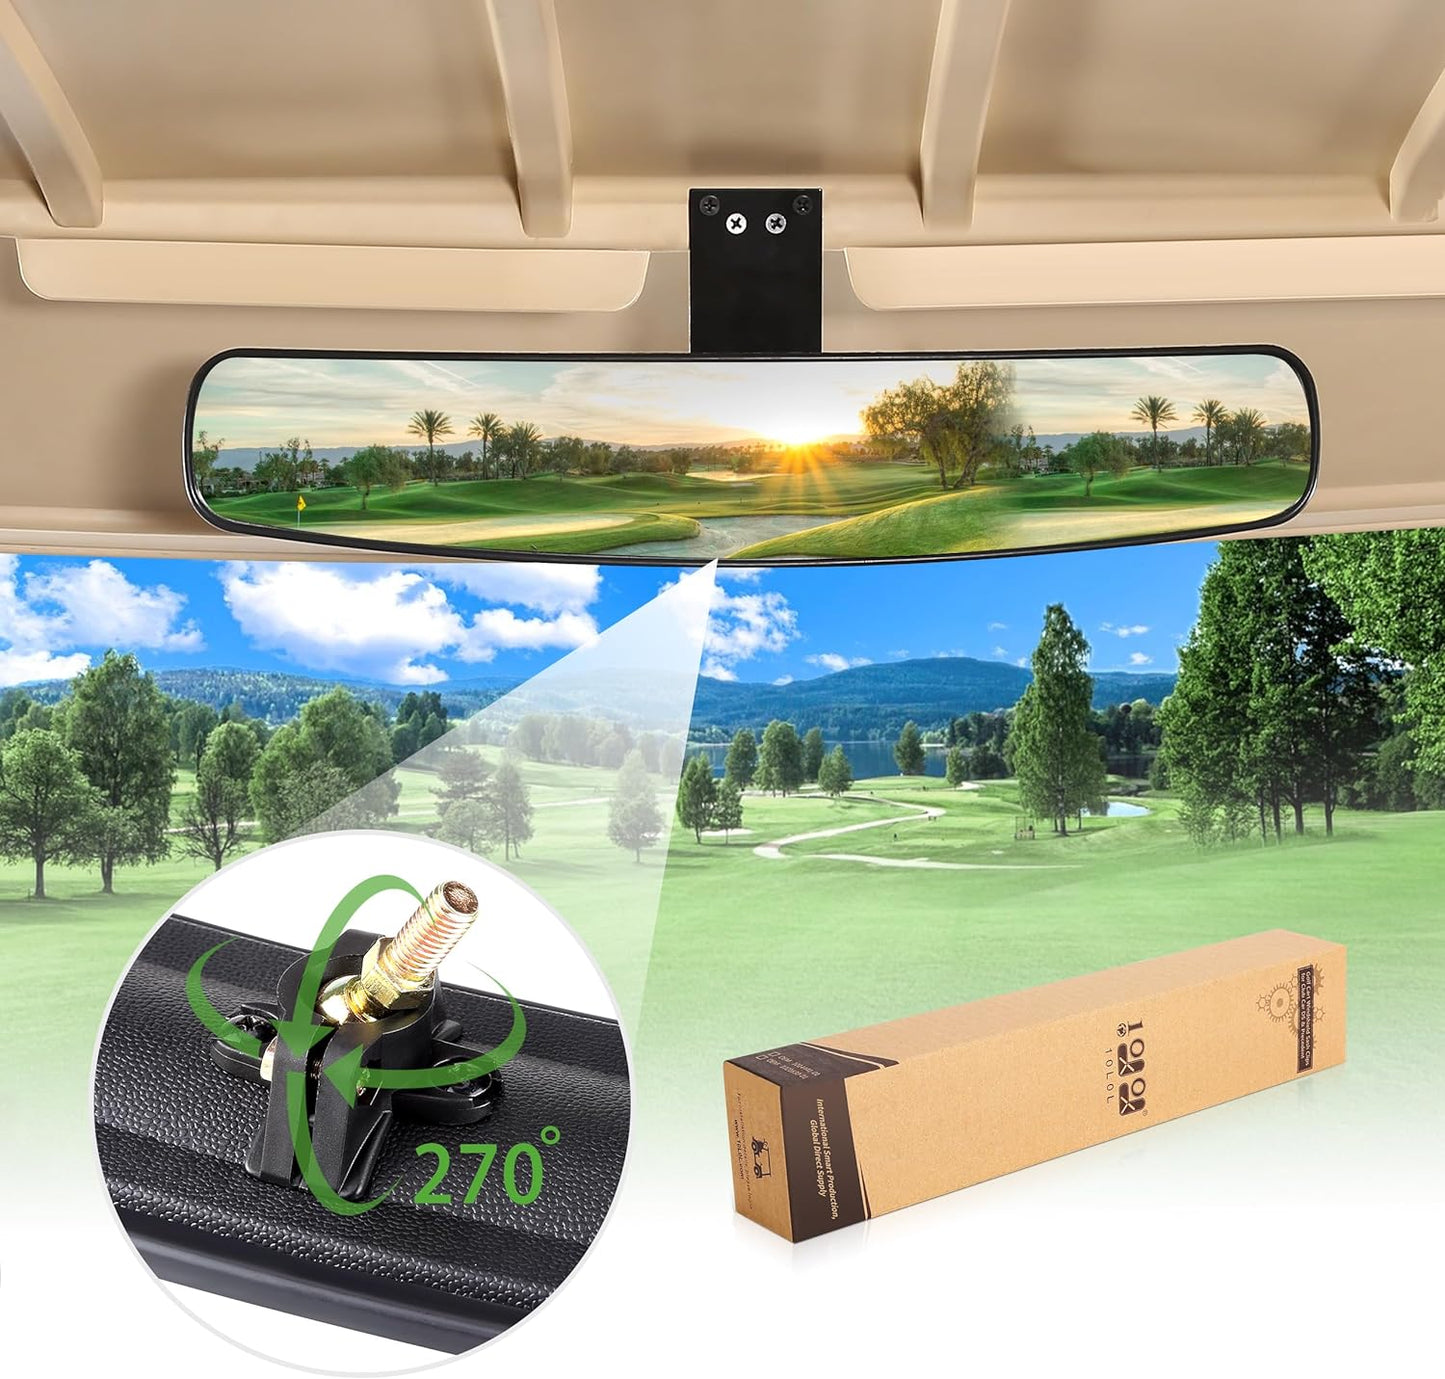 Universal Adjustable Golf Cart Panoramic Rear View Mirror, Rotatable 270 Rotation 16.5"Wide Angle Full Rearview Golf Cart Mirror for EZ Go, Club Car, Yamaha